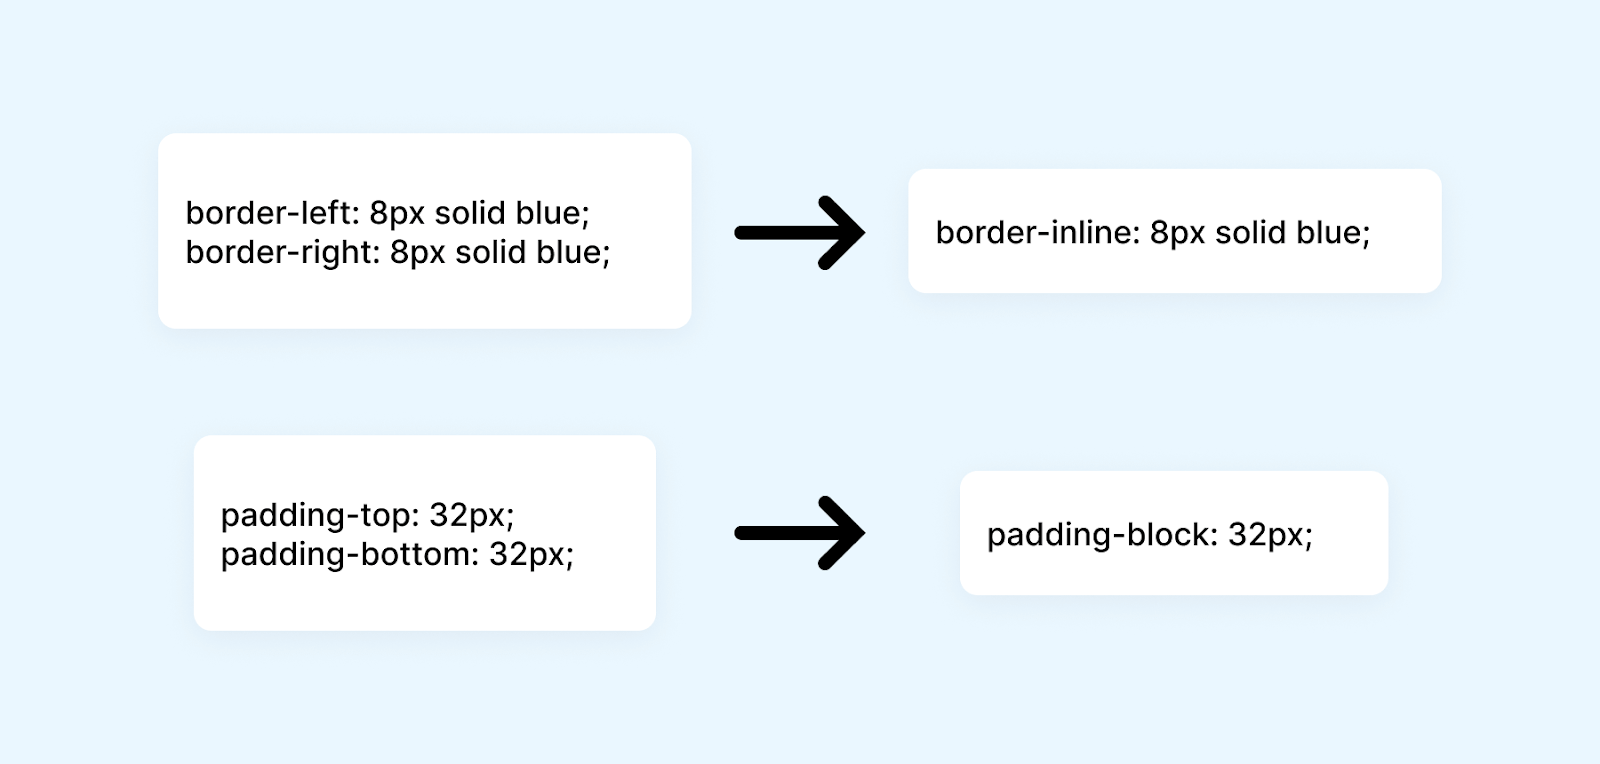 visualization that shows physical border and padding properties